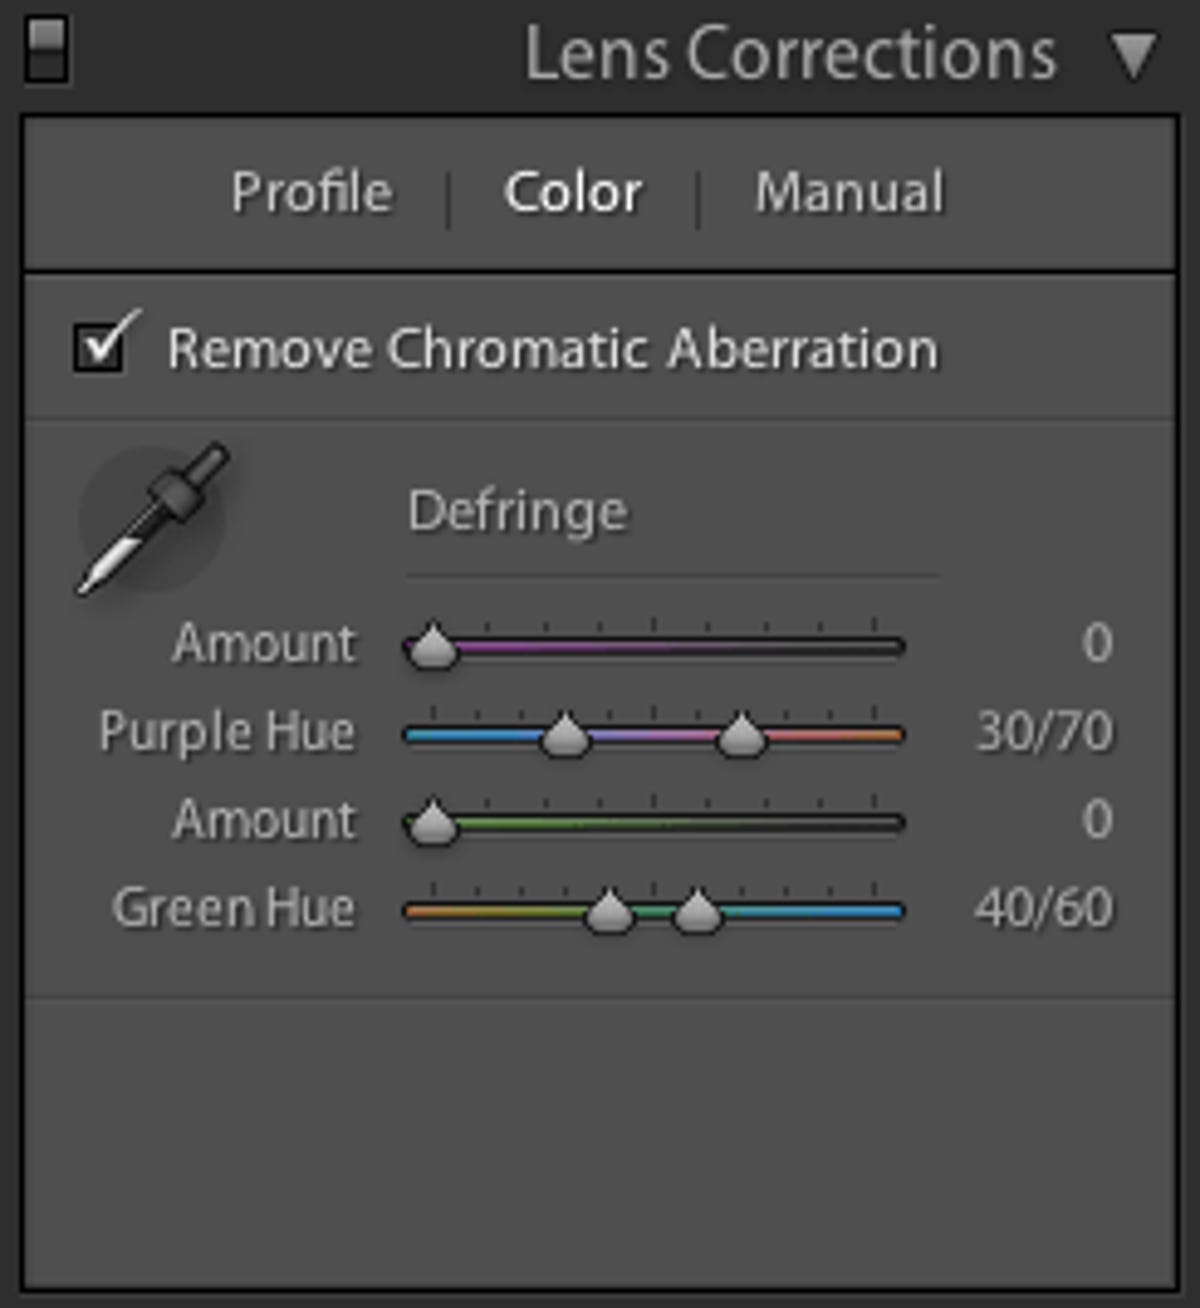 This new panel can fix axial chromatic aberration in Lightroom 4.1. The eyedropper tool can select the colors, the "amount" sliders govern how much colors are desaturated, and the hue sliders govern how broad a spectrum of colors will be treated.